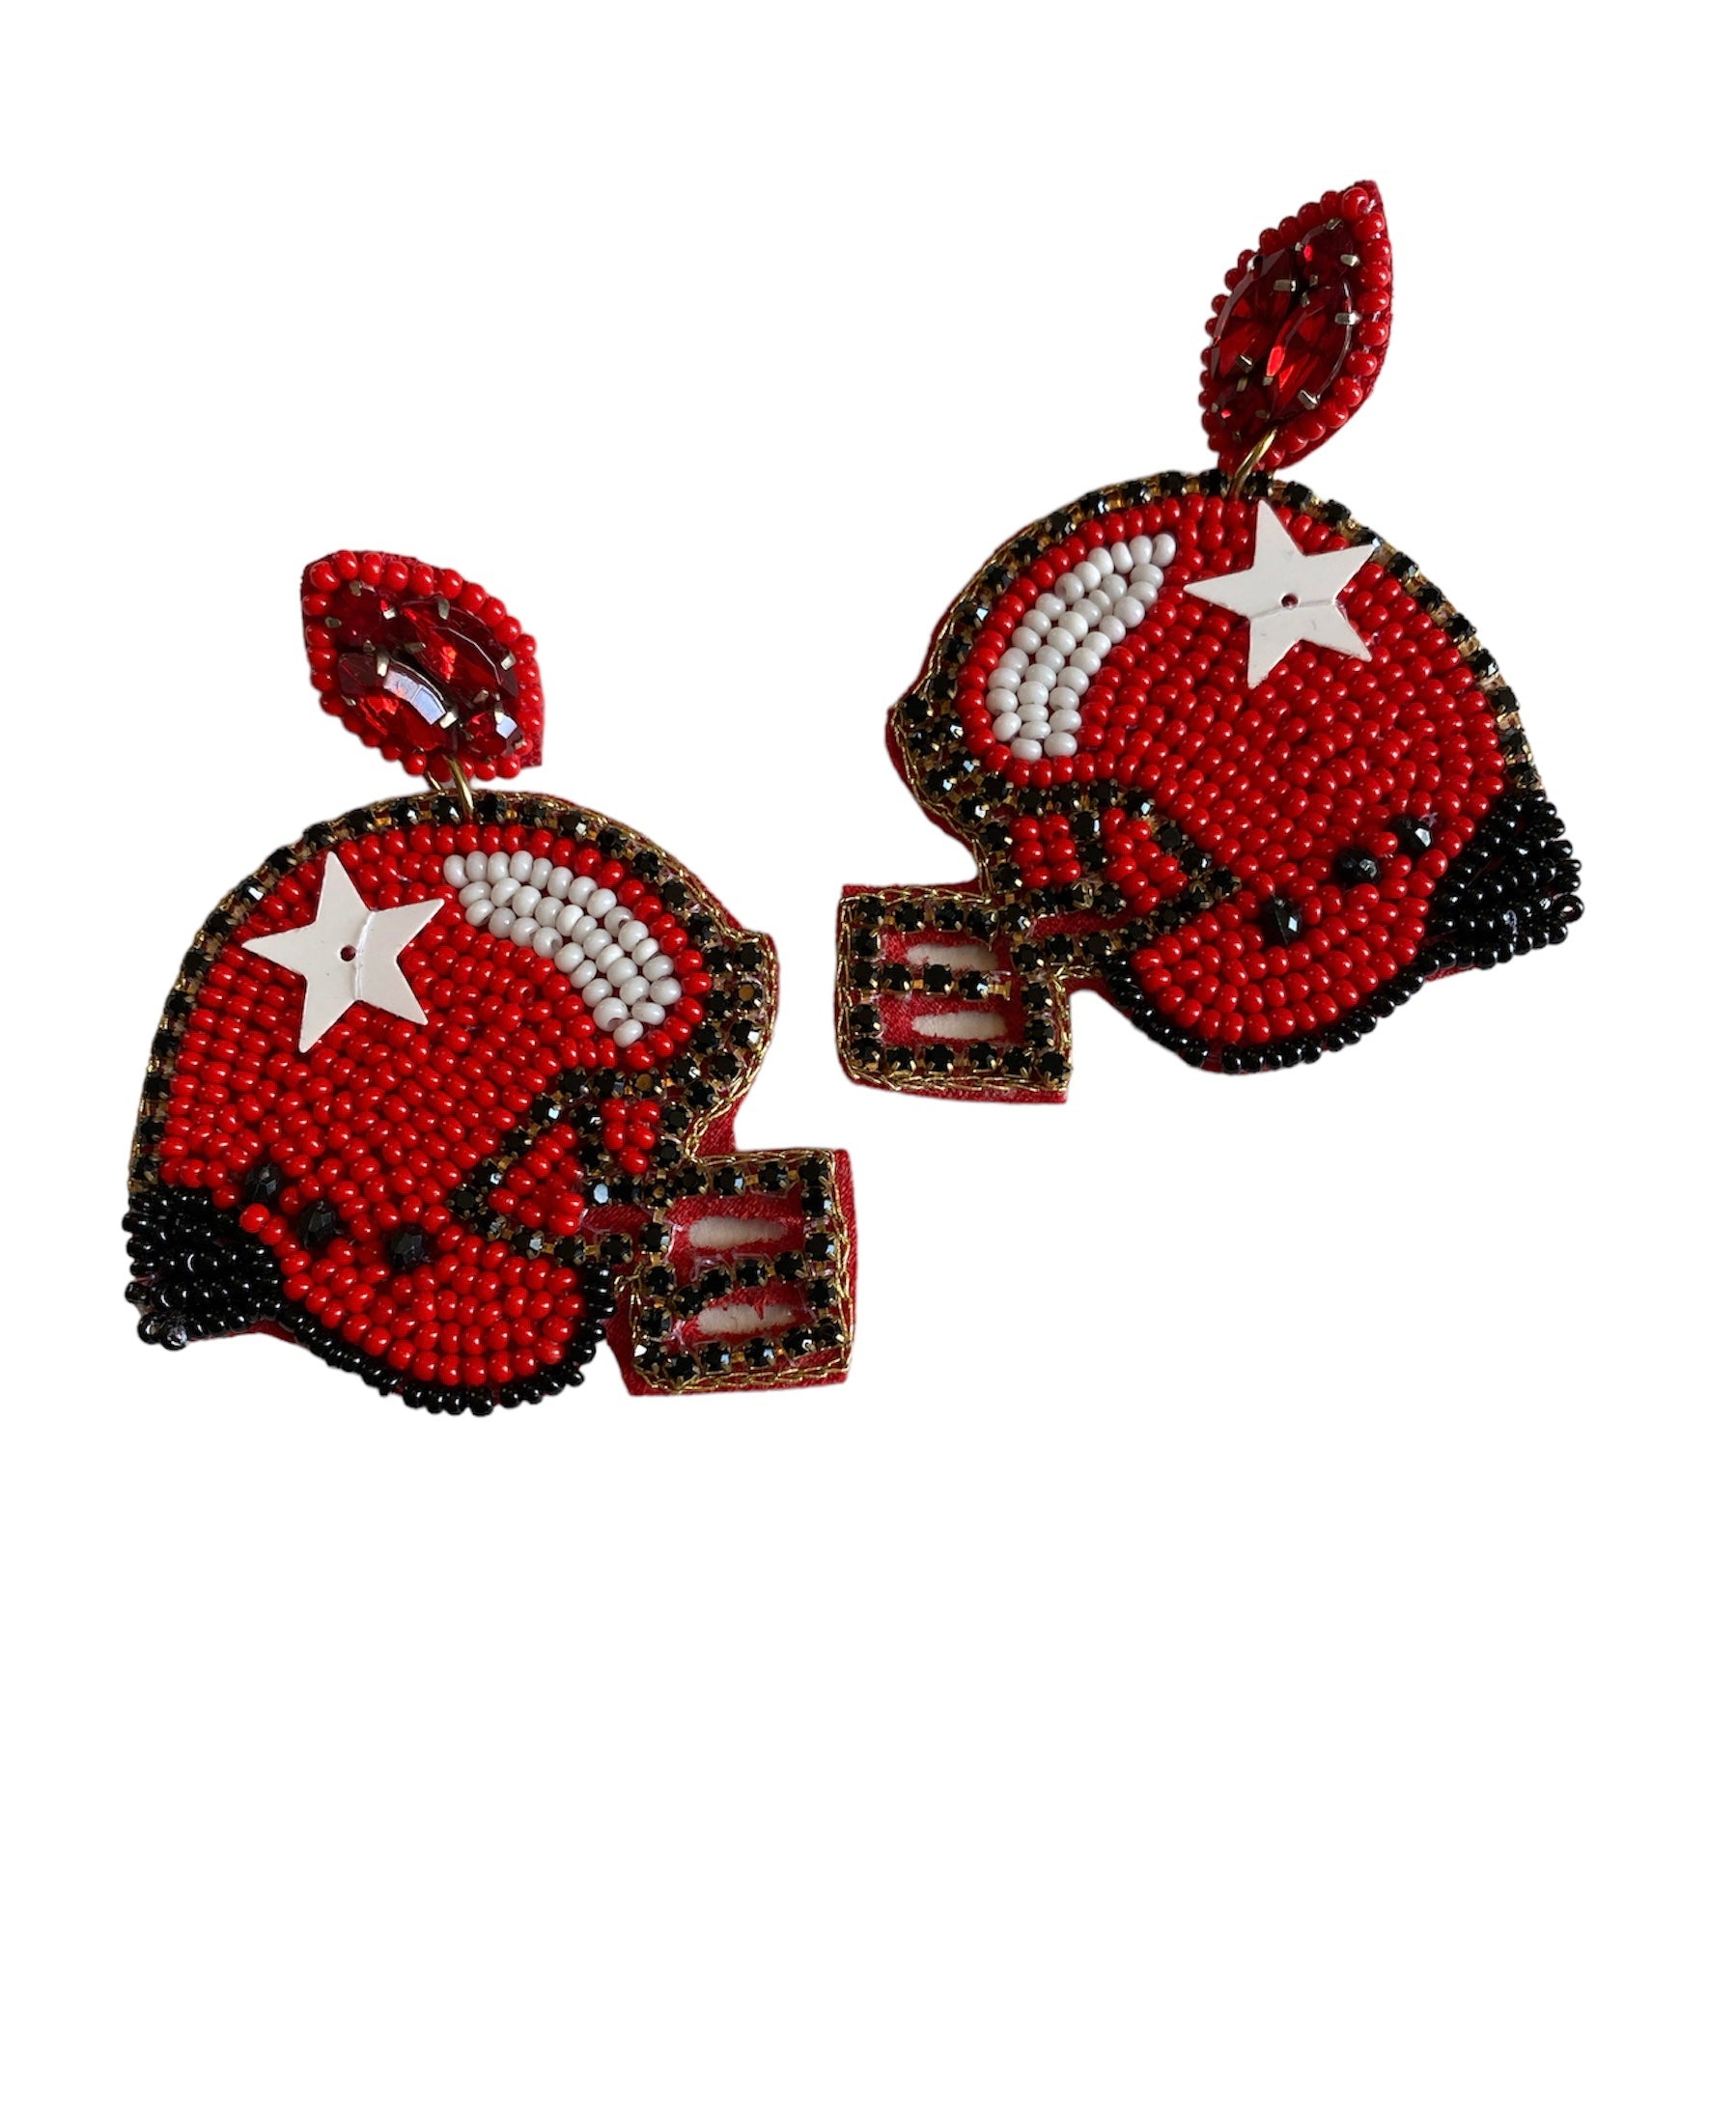 Red and Black Touchdown Earrings